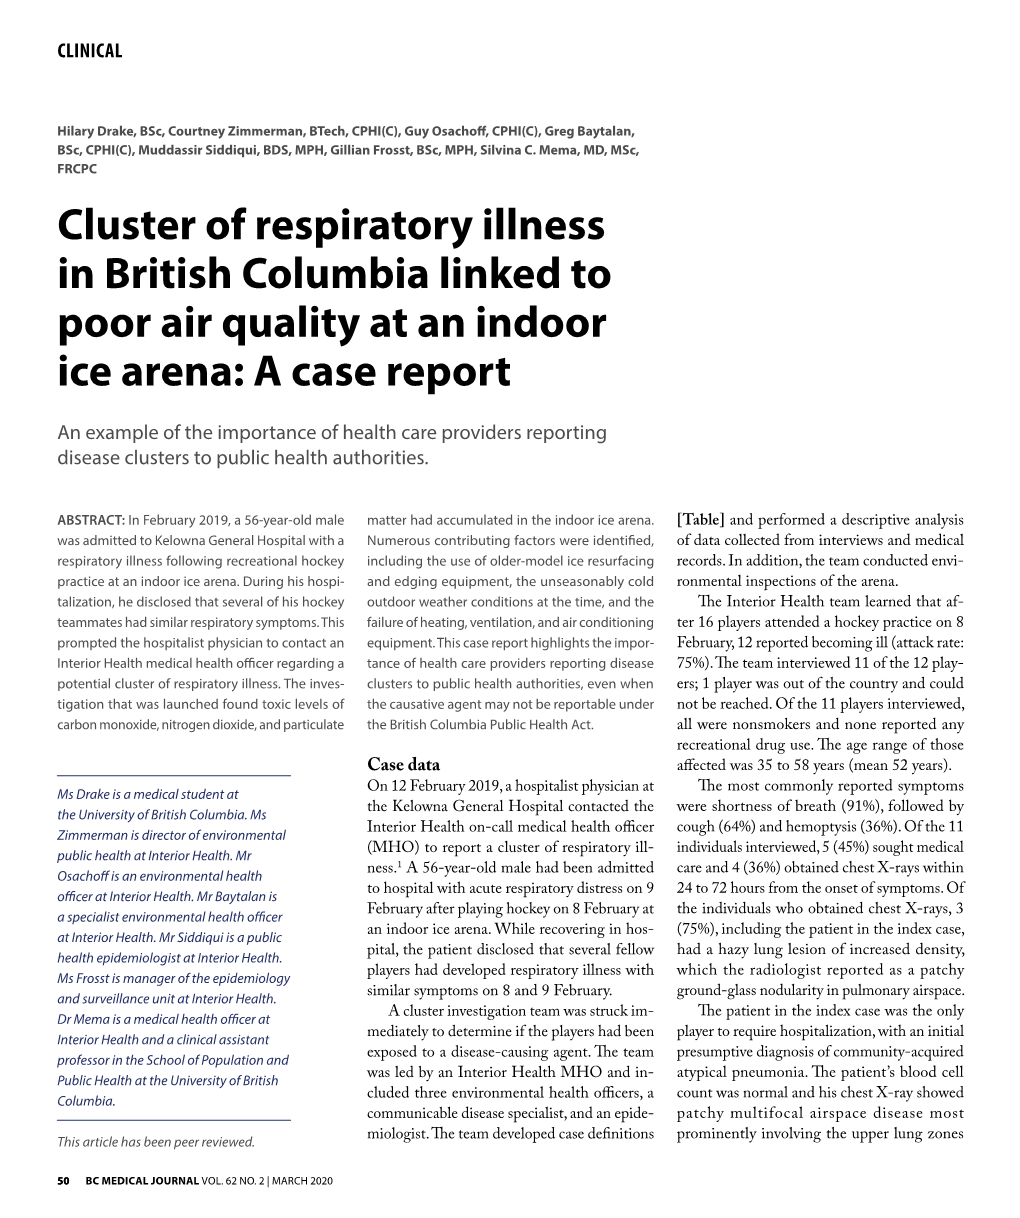 Cluster of Respiratory Illness in British Columbia Linked to Poor Air Quality at an Indoor Ice Arena: a Case Report